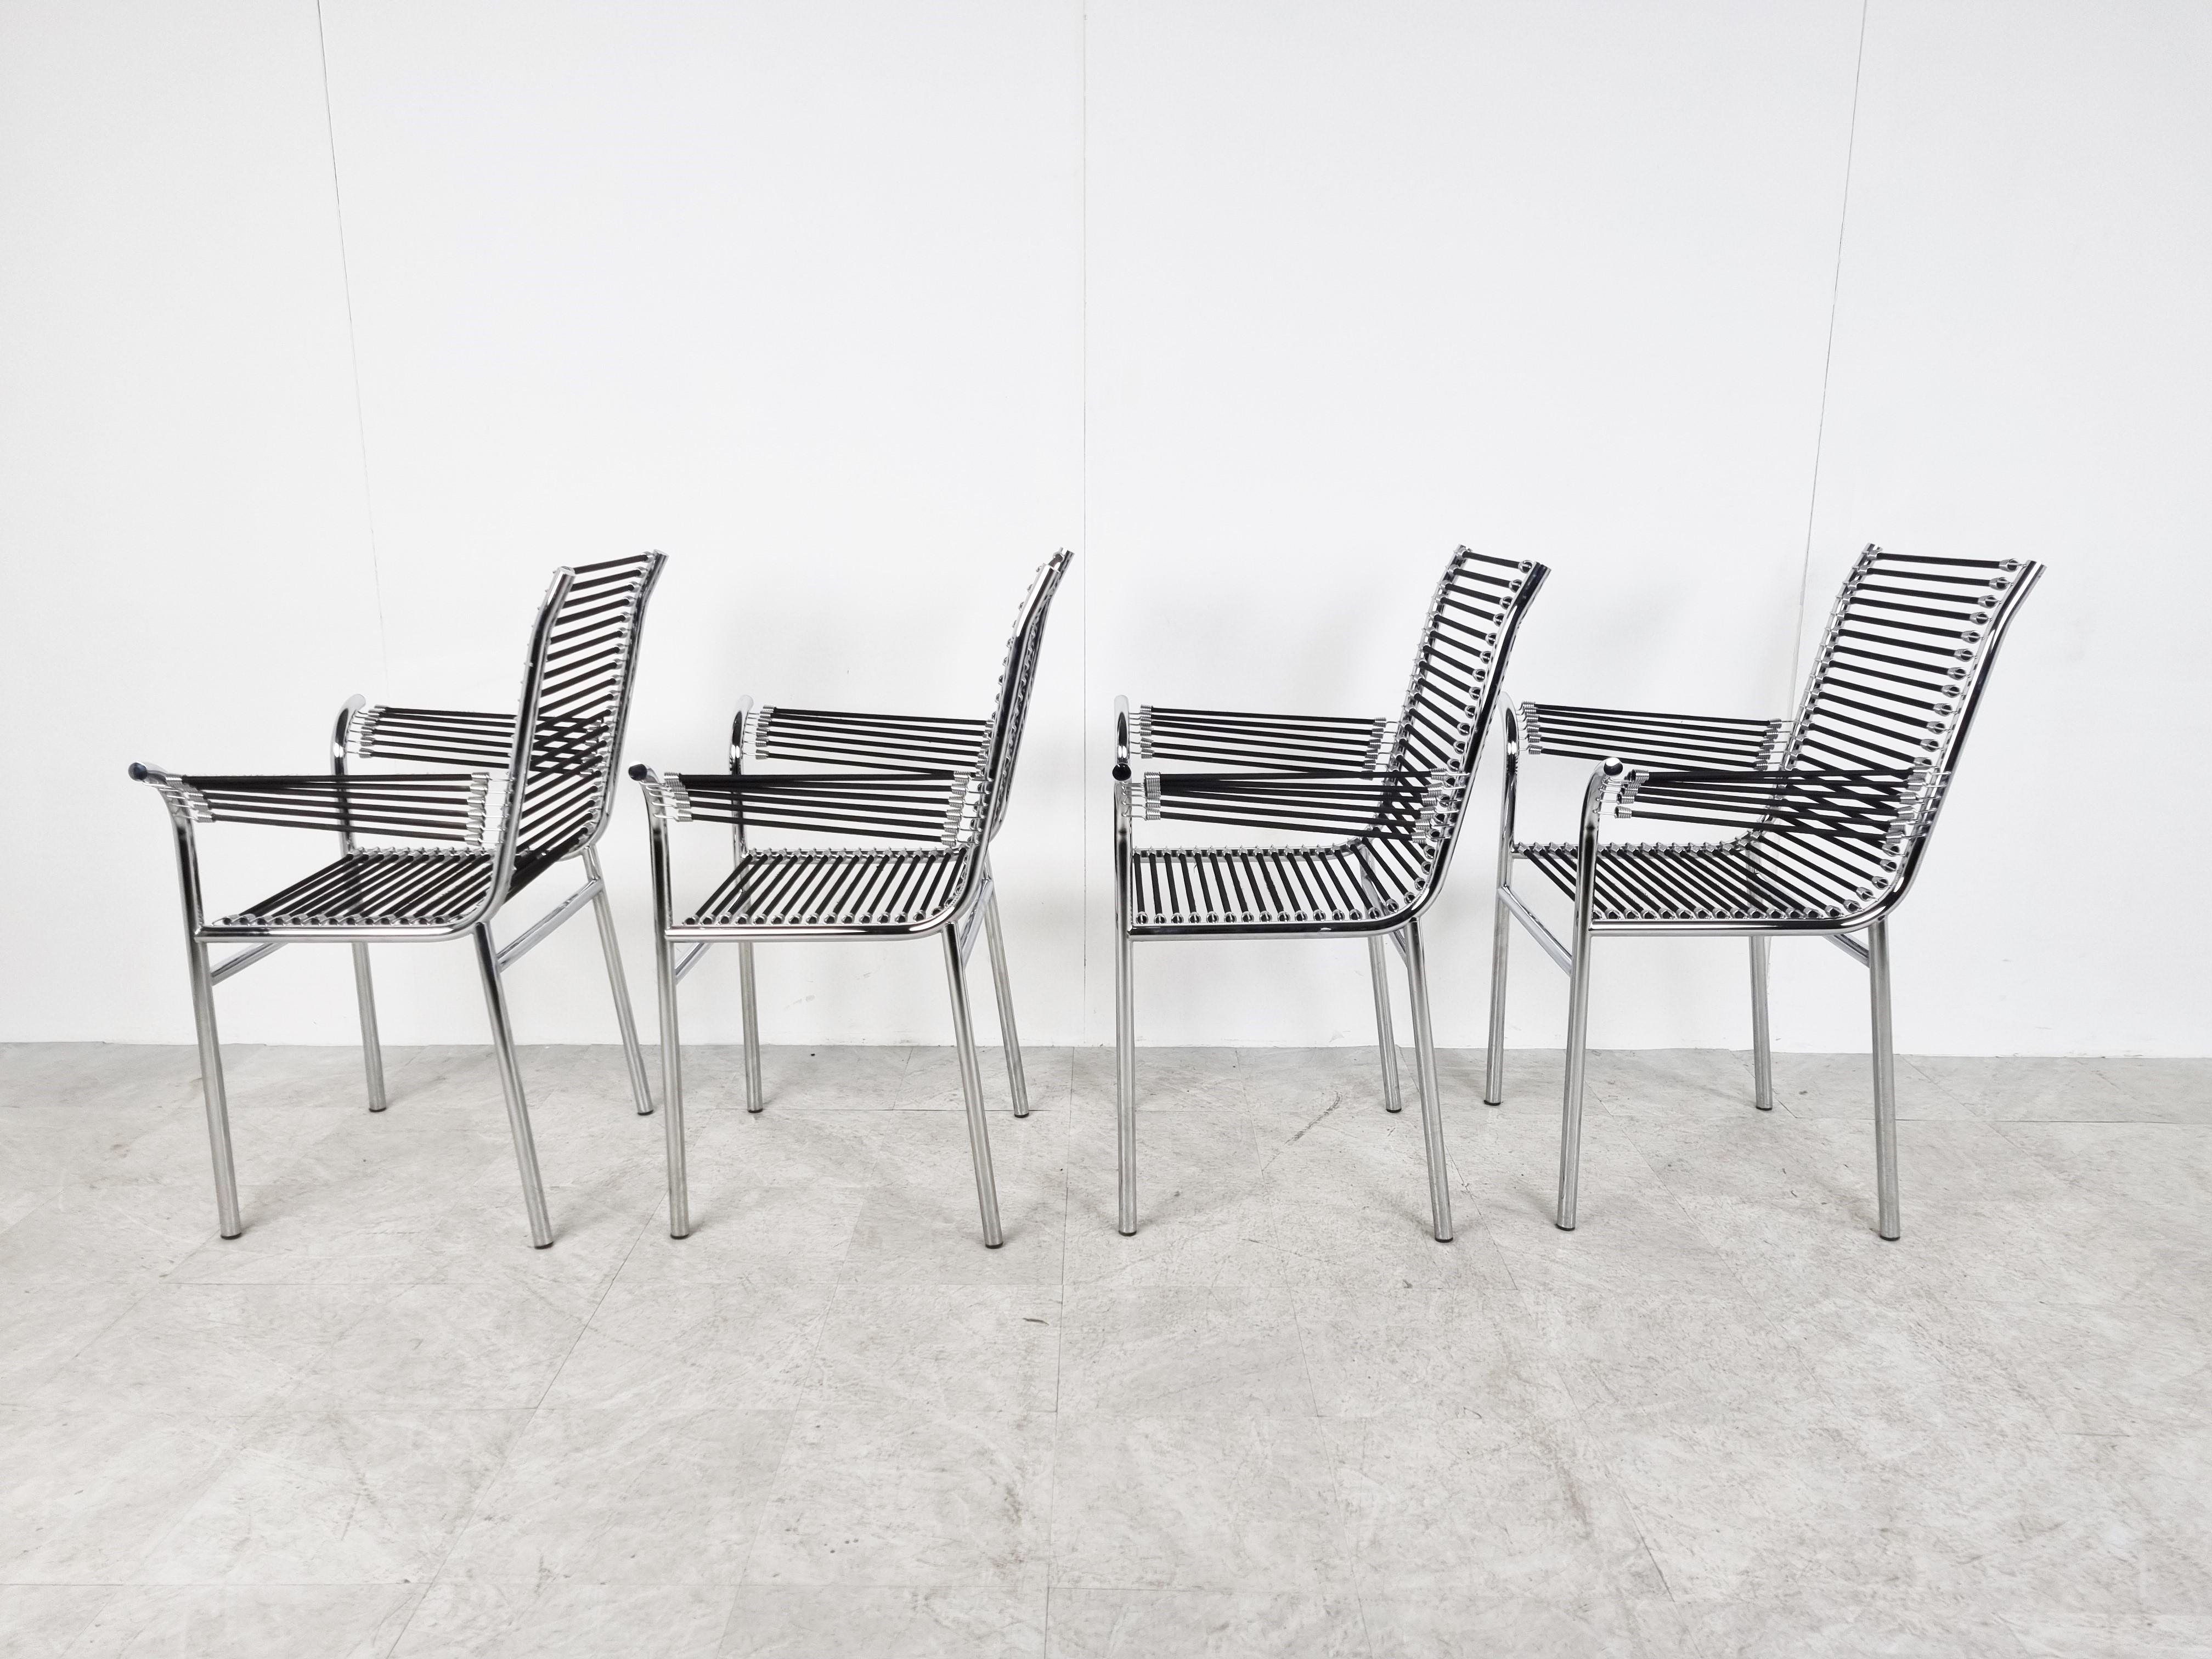 Vintage chromed metal dining chairs with elastic cords designed by rene Herbst in the bauhaus period and produced in the 1980s

These are the versions with armrests which are very rare.

Very good condition.

1980s -